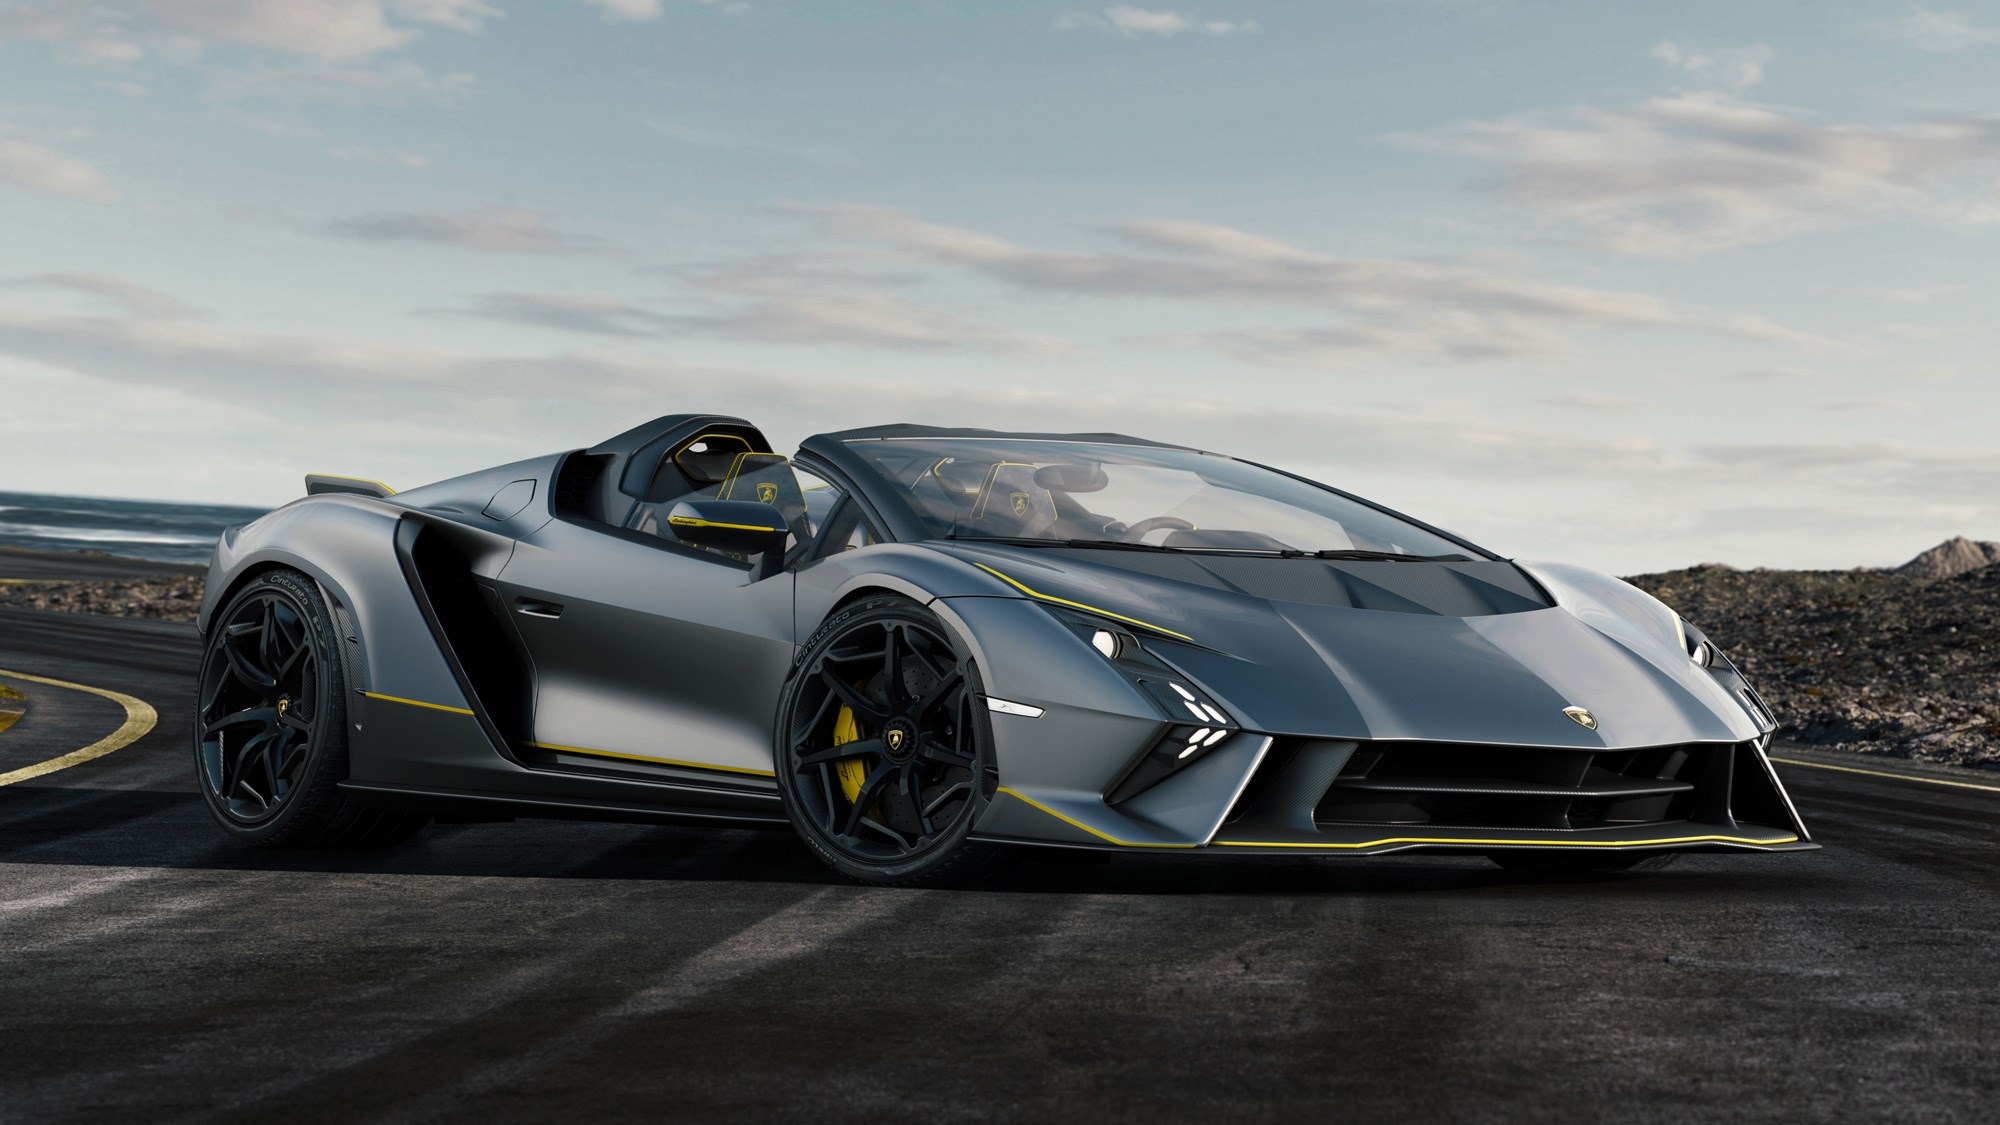 Lamborghini bids farewell to its V12 with pair of one-off